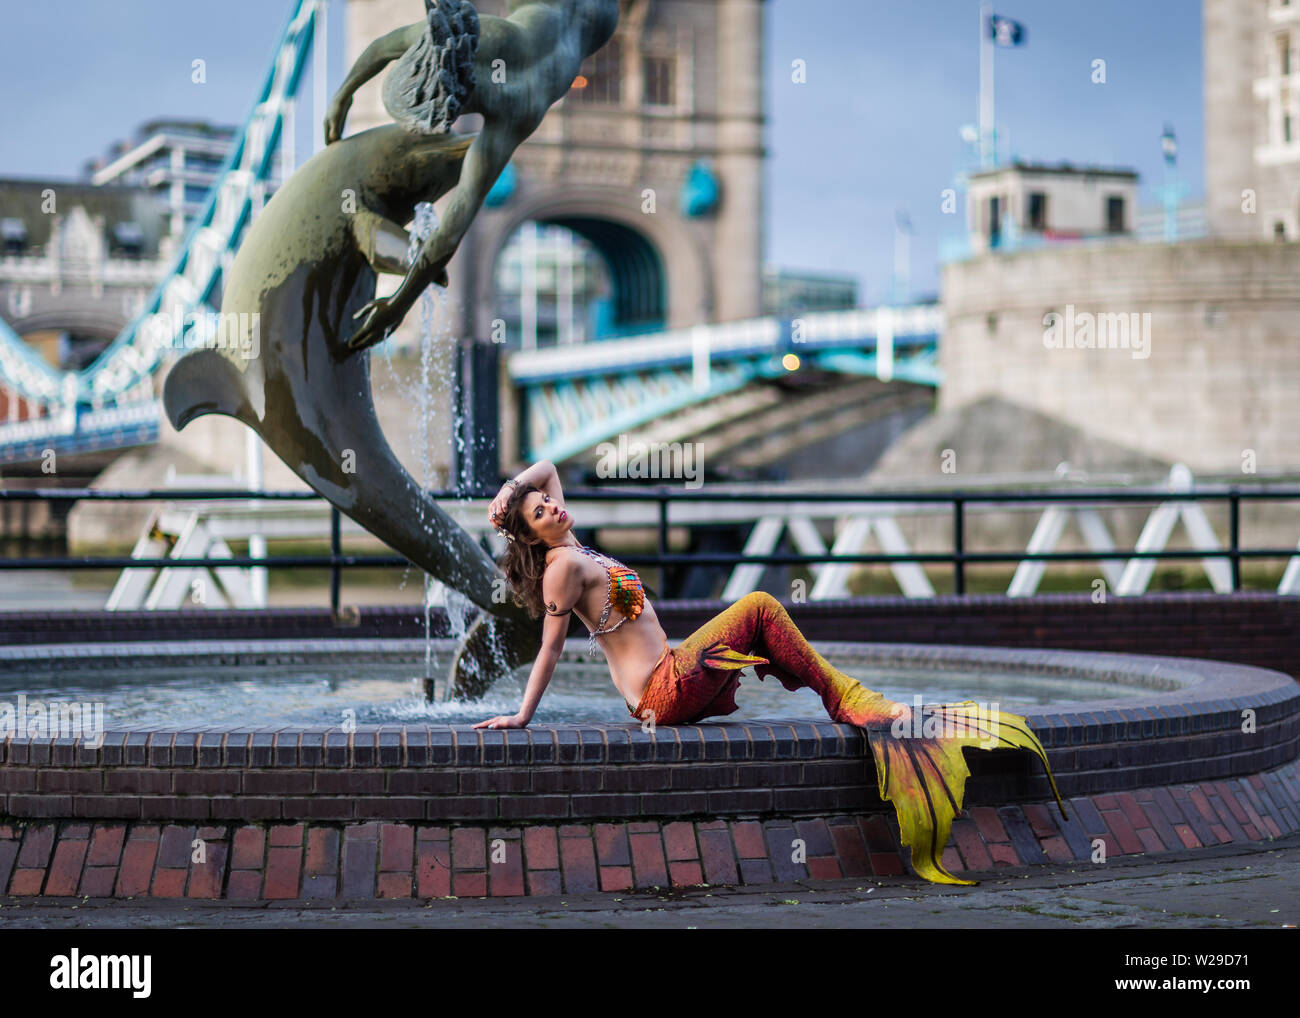 A mermaid poses by the Girl and Dolphin by Tower Bridge in London England. 2 Stock Photo